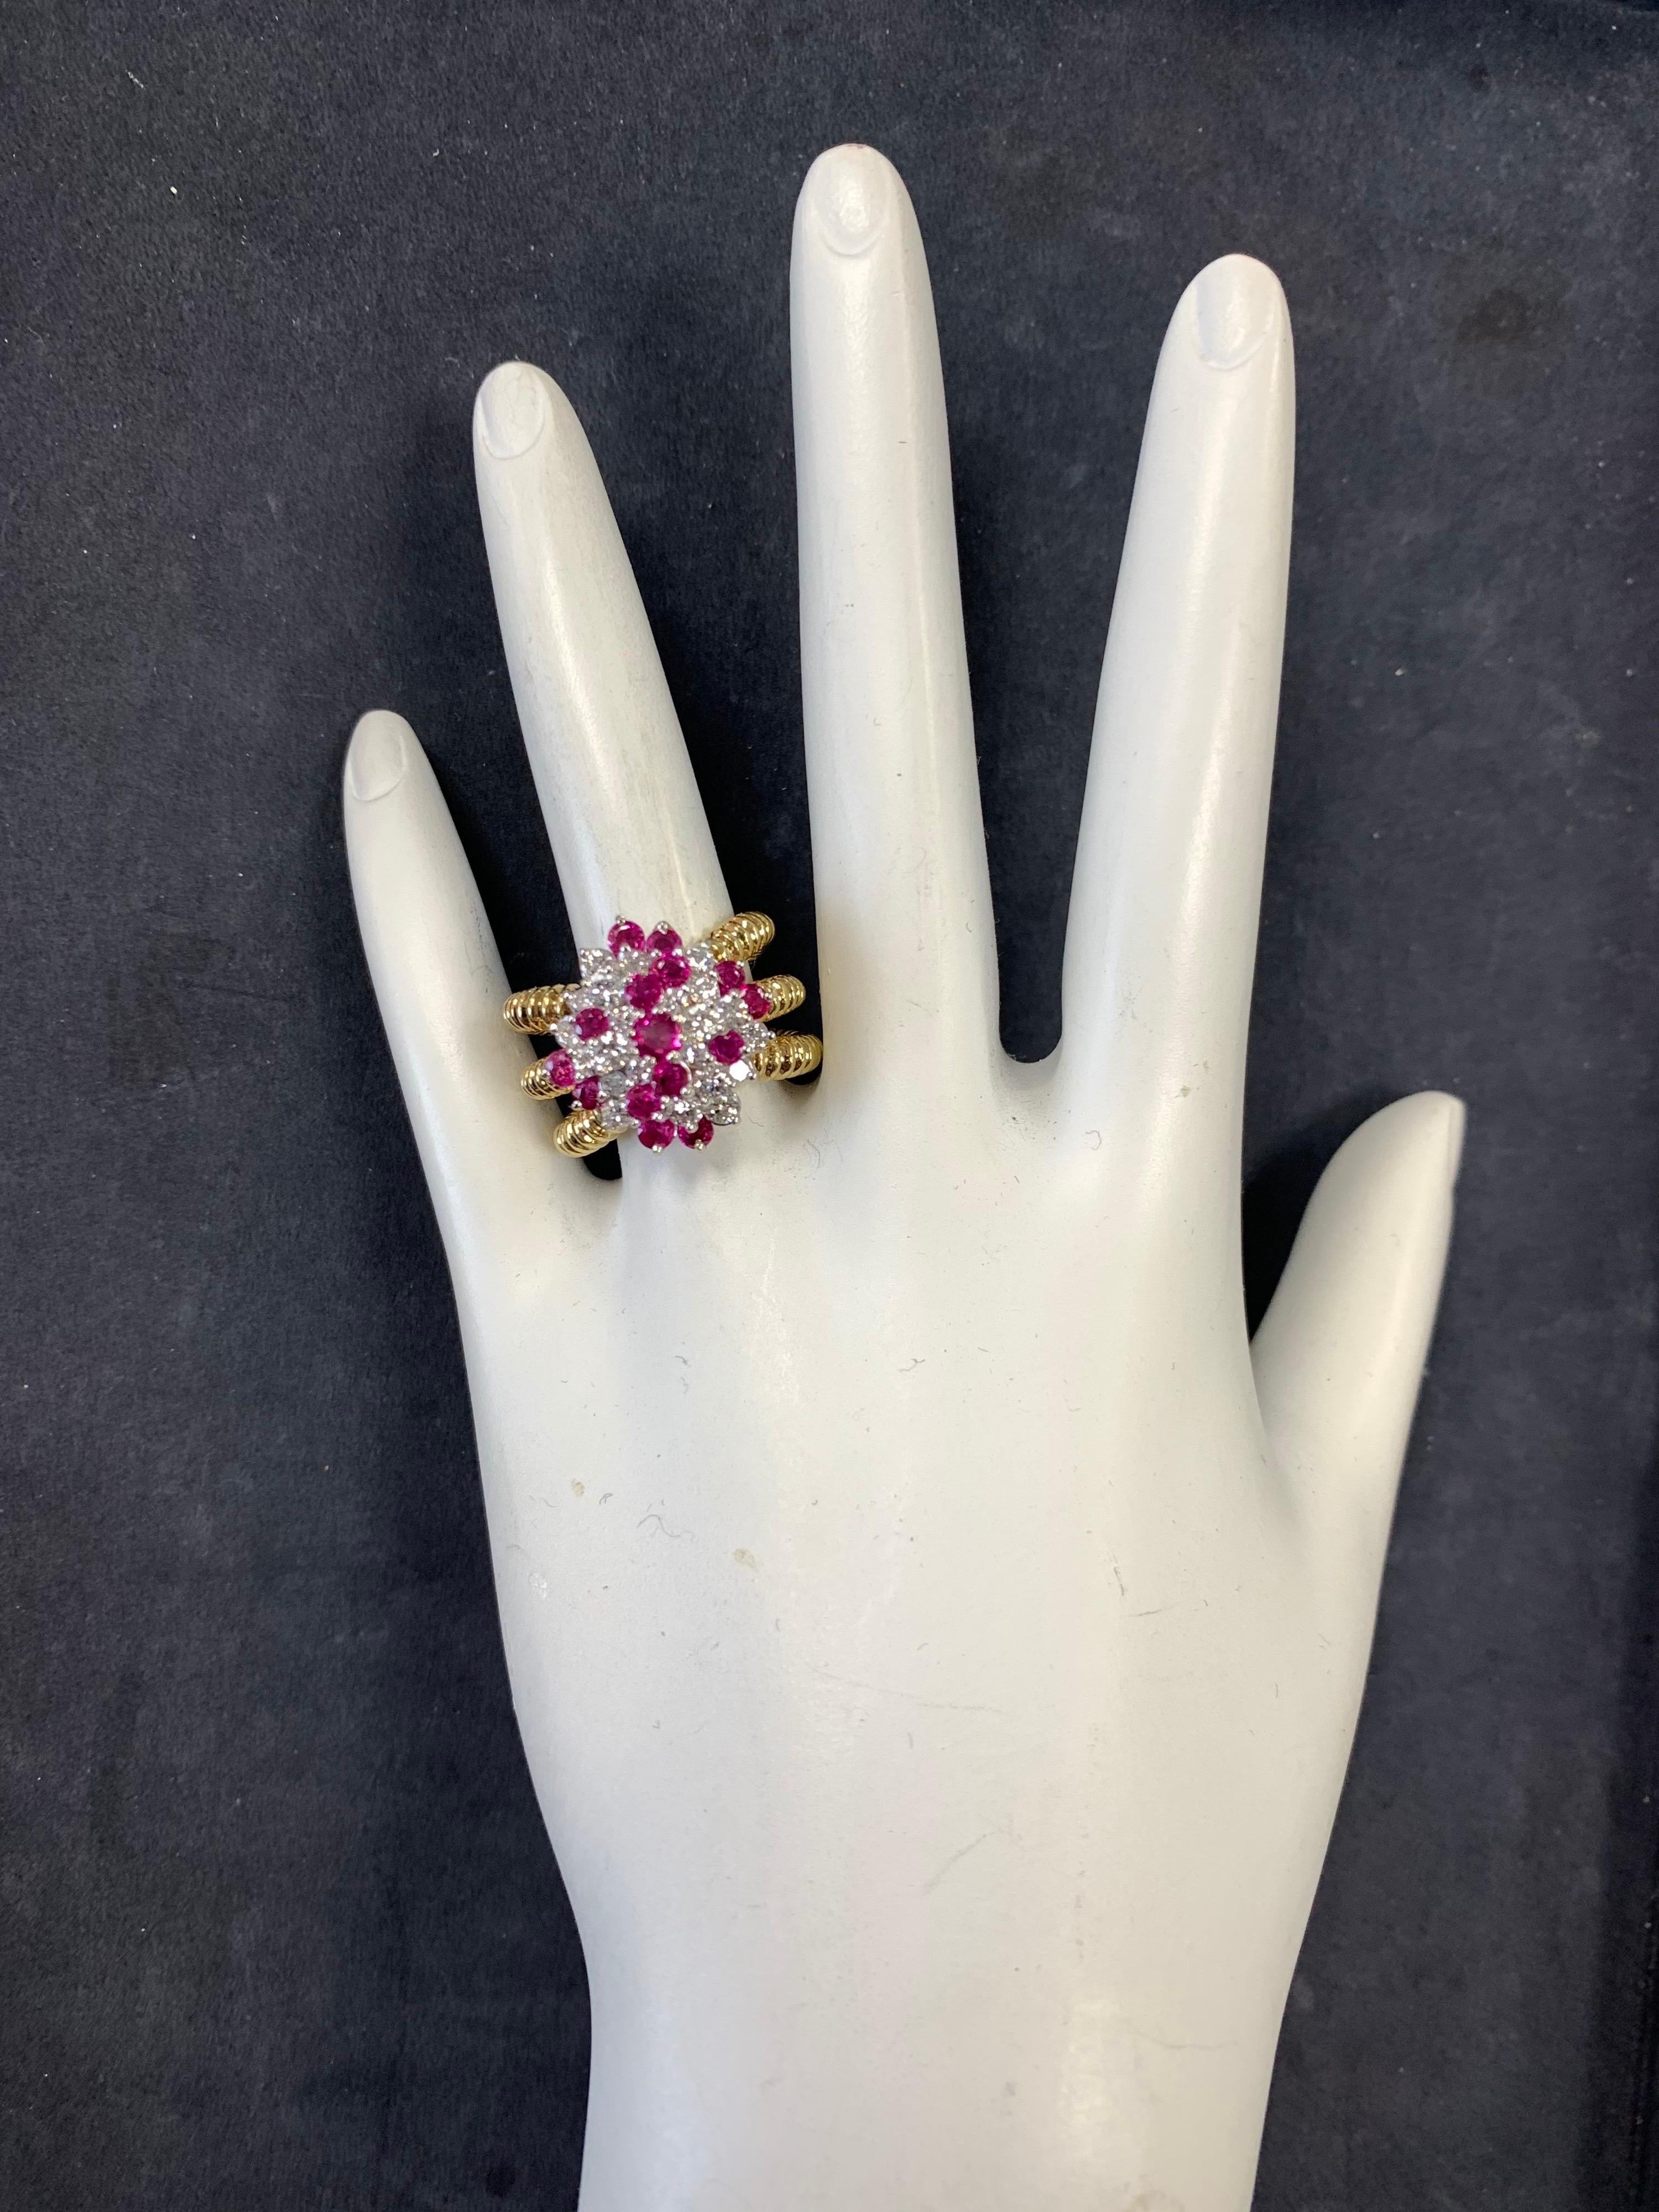 Retro Gold 2 Carat Natural Ruby Gem & Colorless Diamond Cocktail Ring Circa 1960.

Stunning Estate 18k Gold cocktail ring. It is set with 22 round brilliant colorless natural diamonds and 15 natural gem rubies. The weight is approximately 2 carats